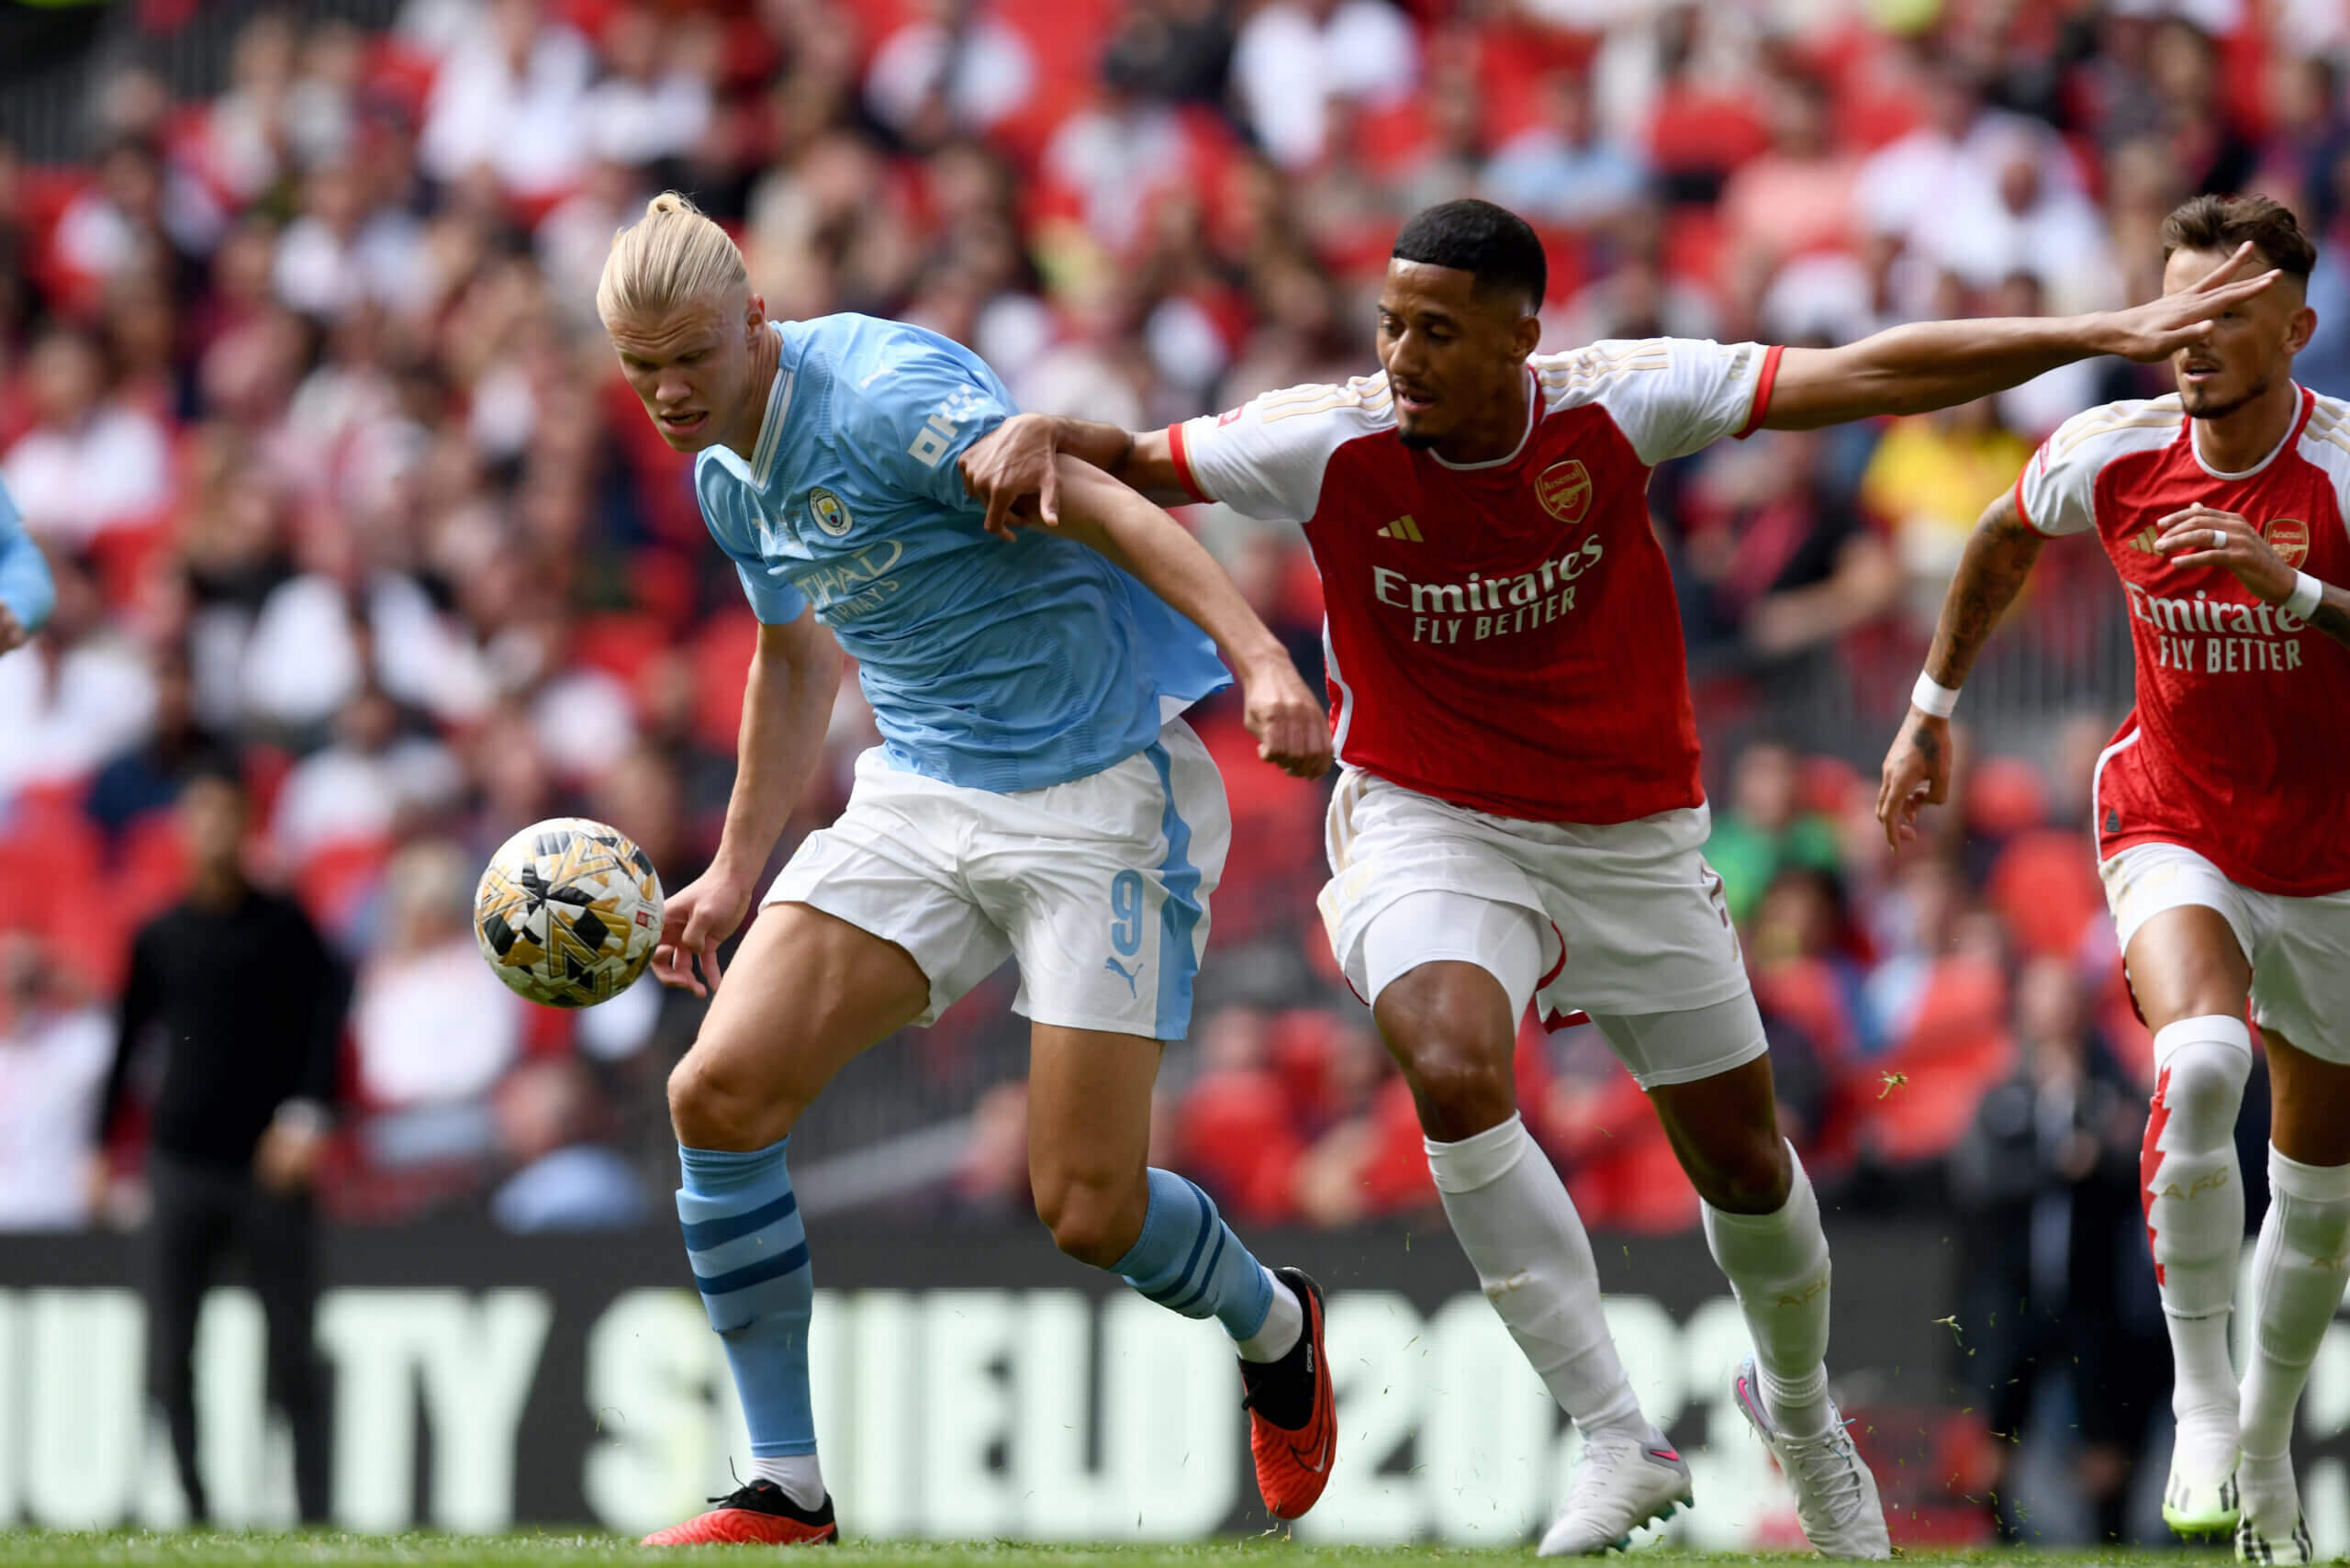 Top of the world: Arsenal overtake Man City in squad value